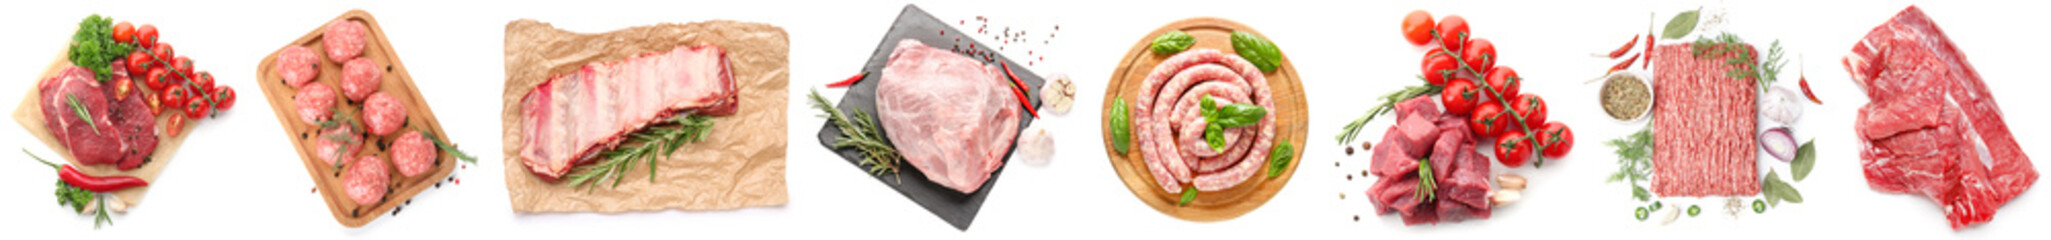 Collection of fresh meat on white background